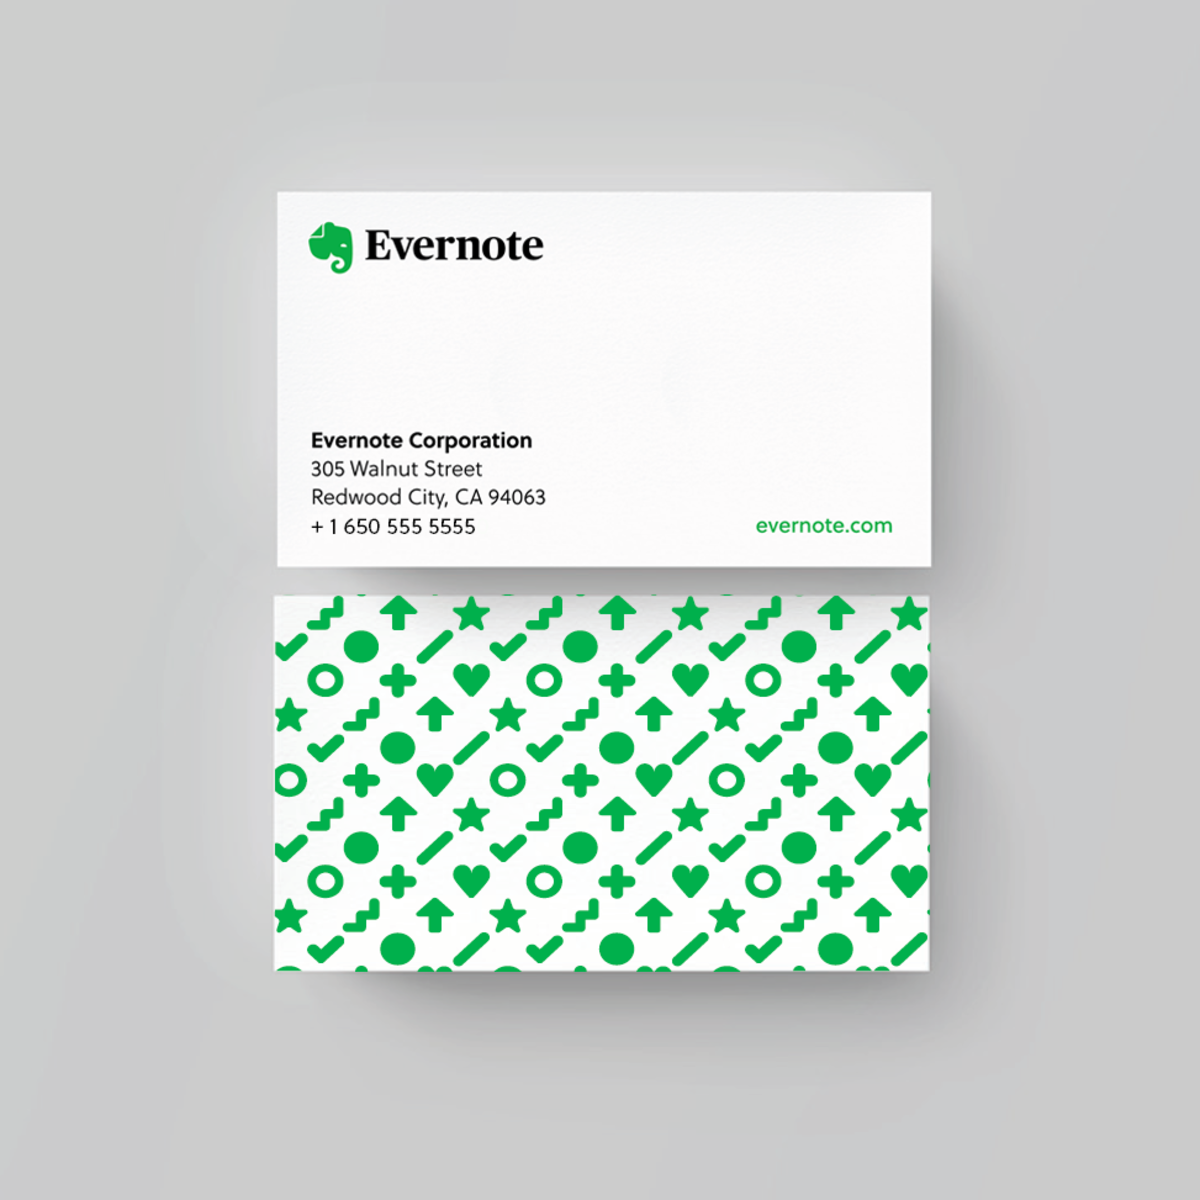 evernote for business cards 4